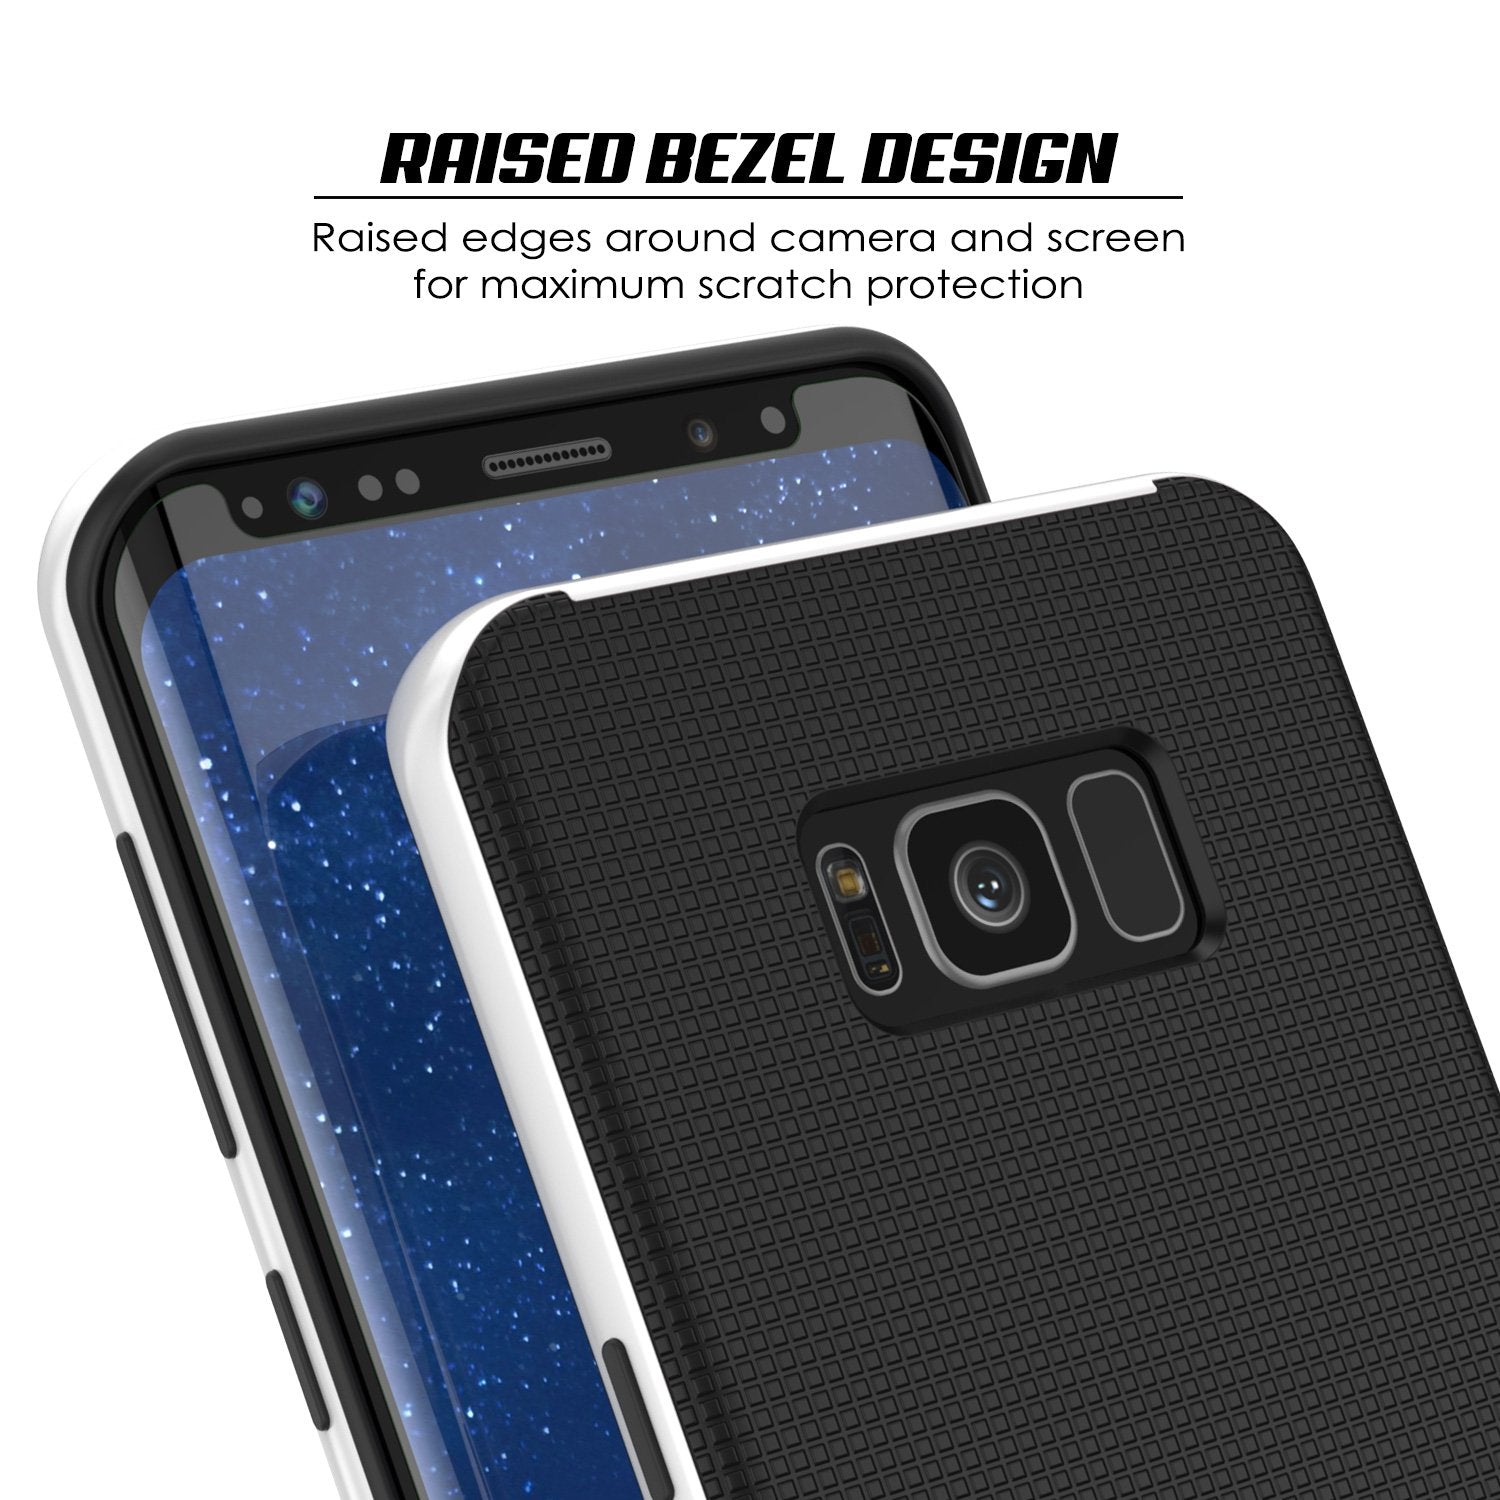 Galaxy S8 Case, PunkCase Stealth White Series Hybrid 3-Piece Shockproof Dual Layer Cover